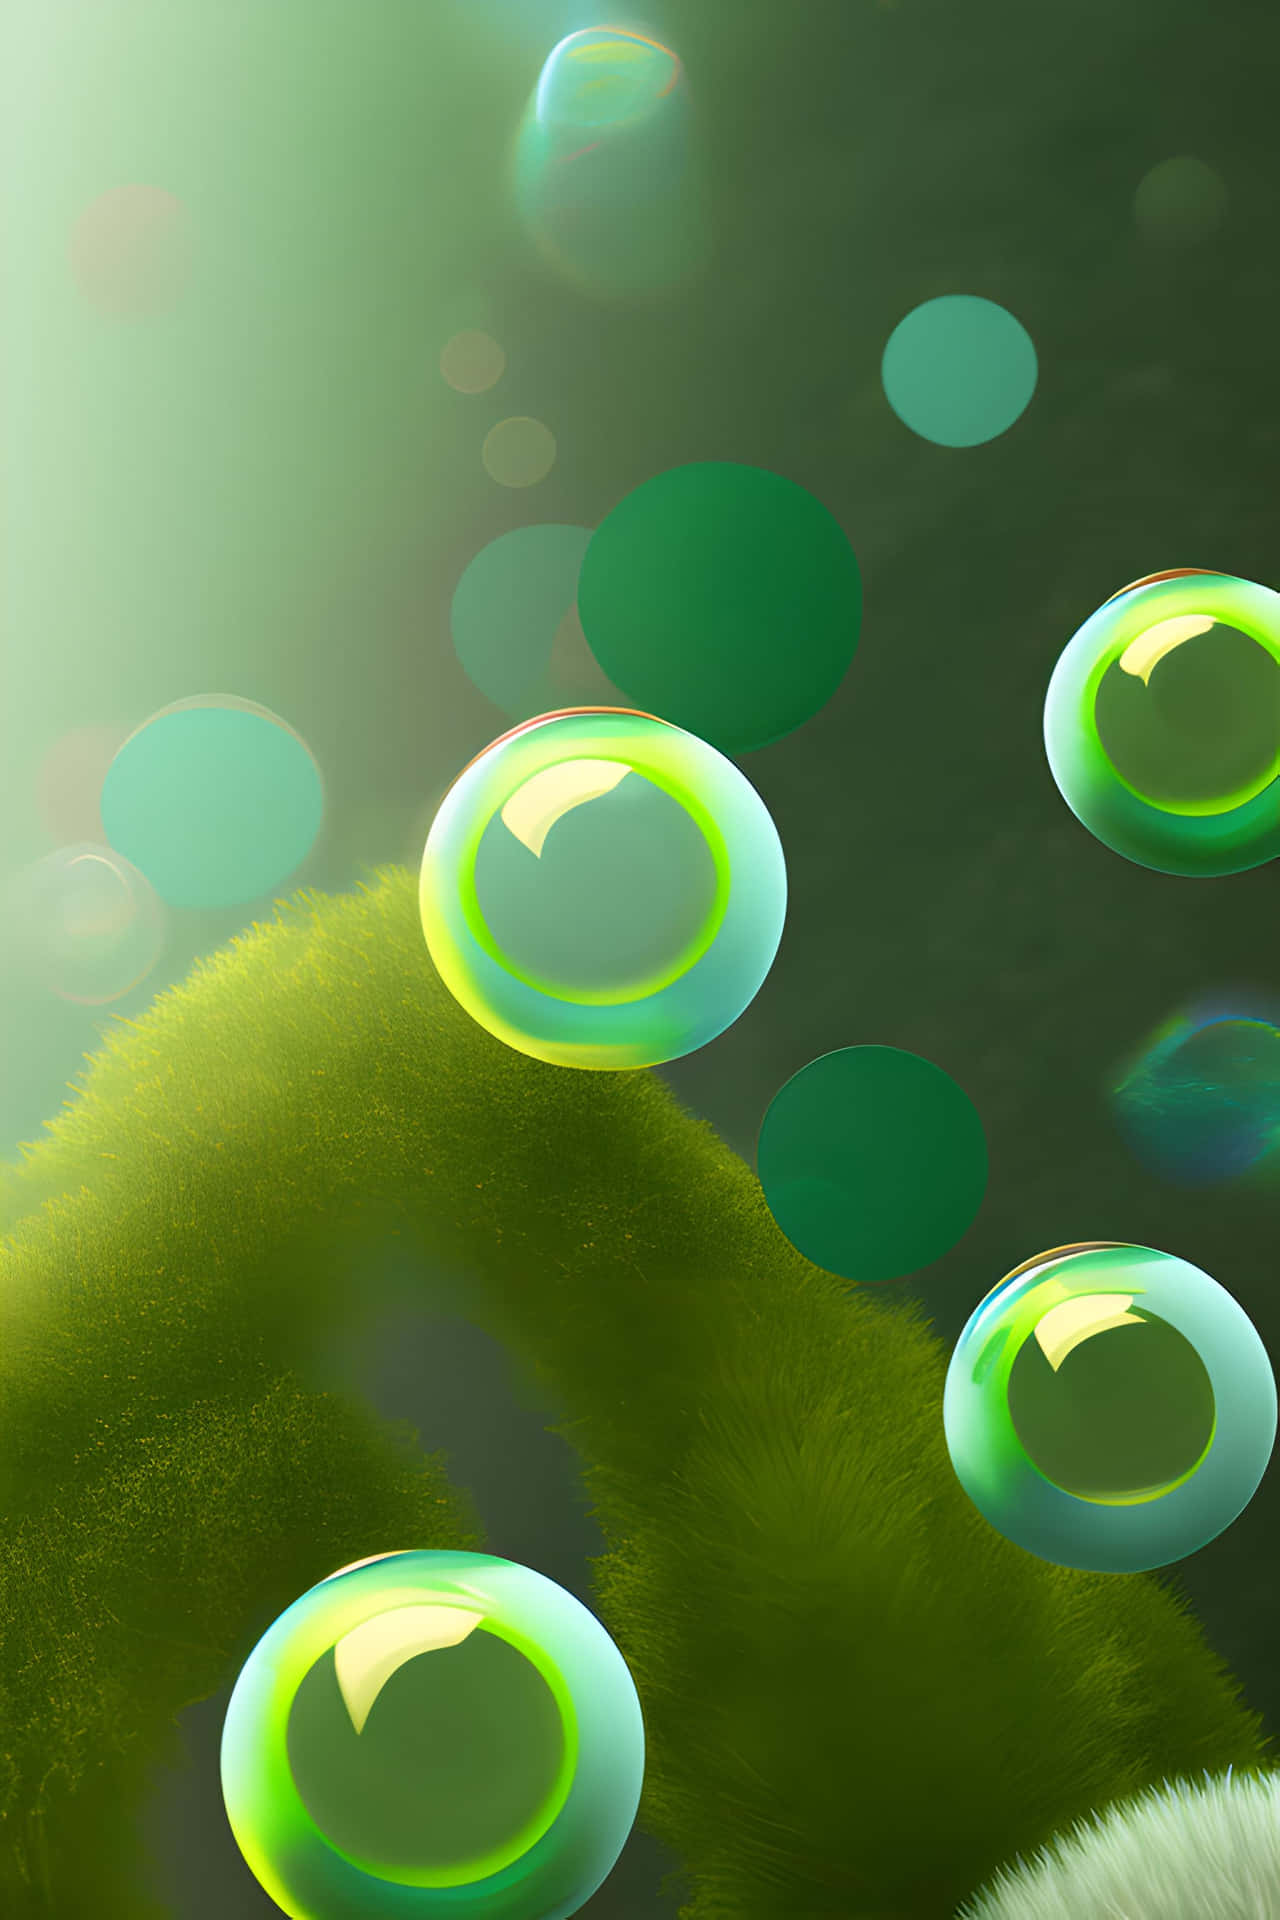 Abstract Bubblesand Fuzzy Green Background Wallpaper